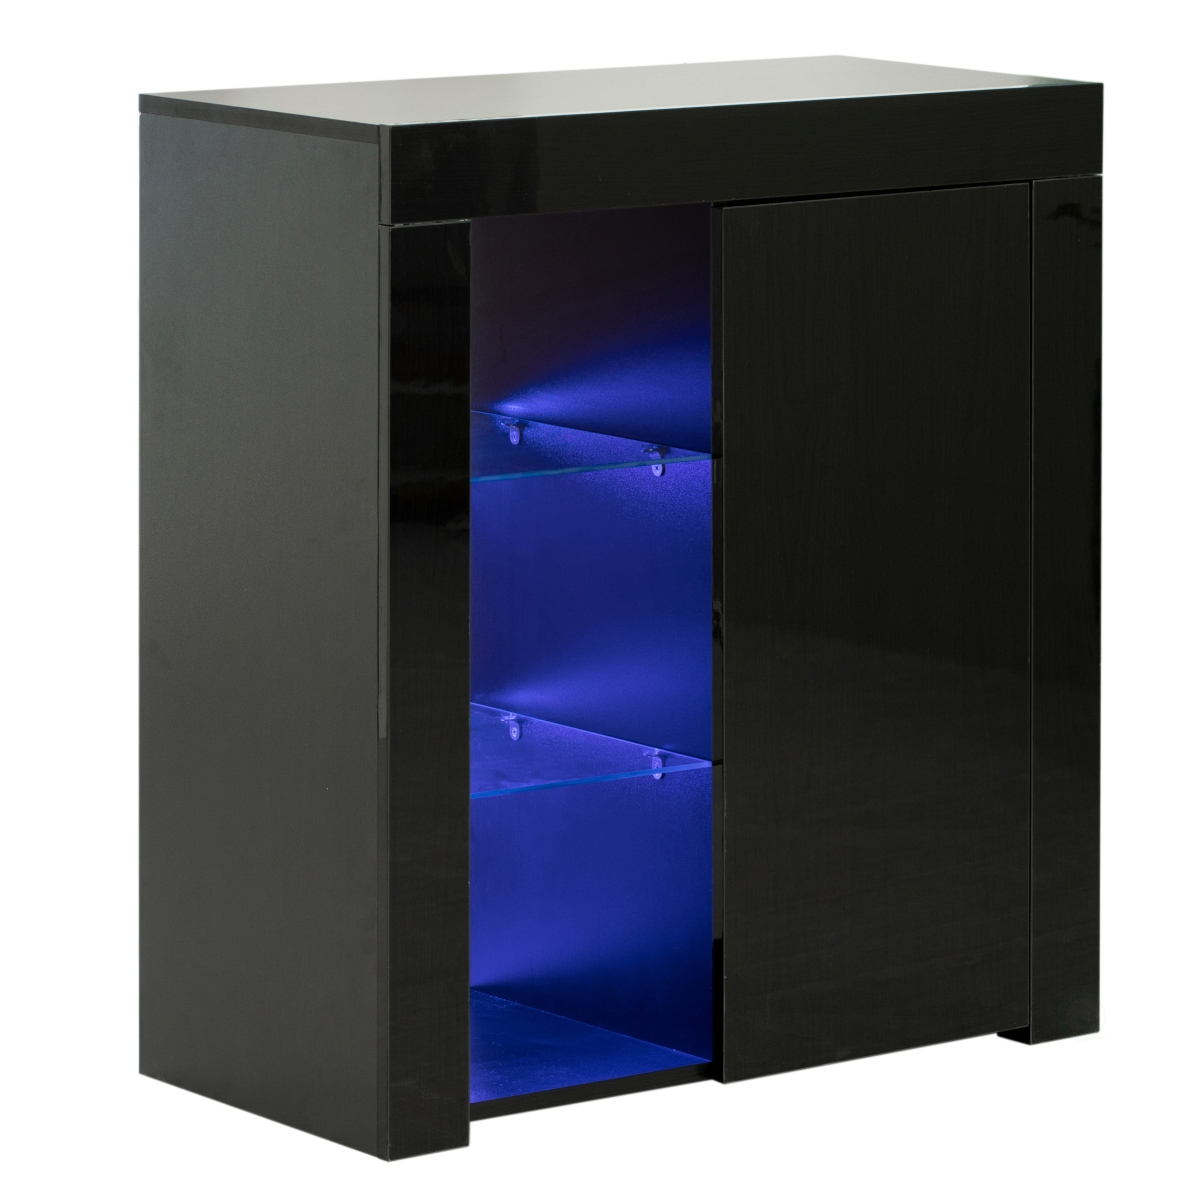 Picture of Basicwise QI003951.BK Office or Living Room Side Storage Cabinet With LED, Black